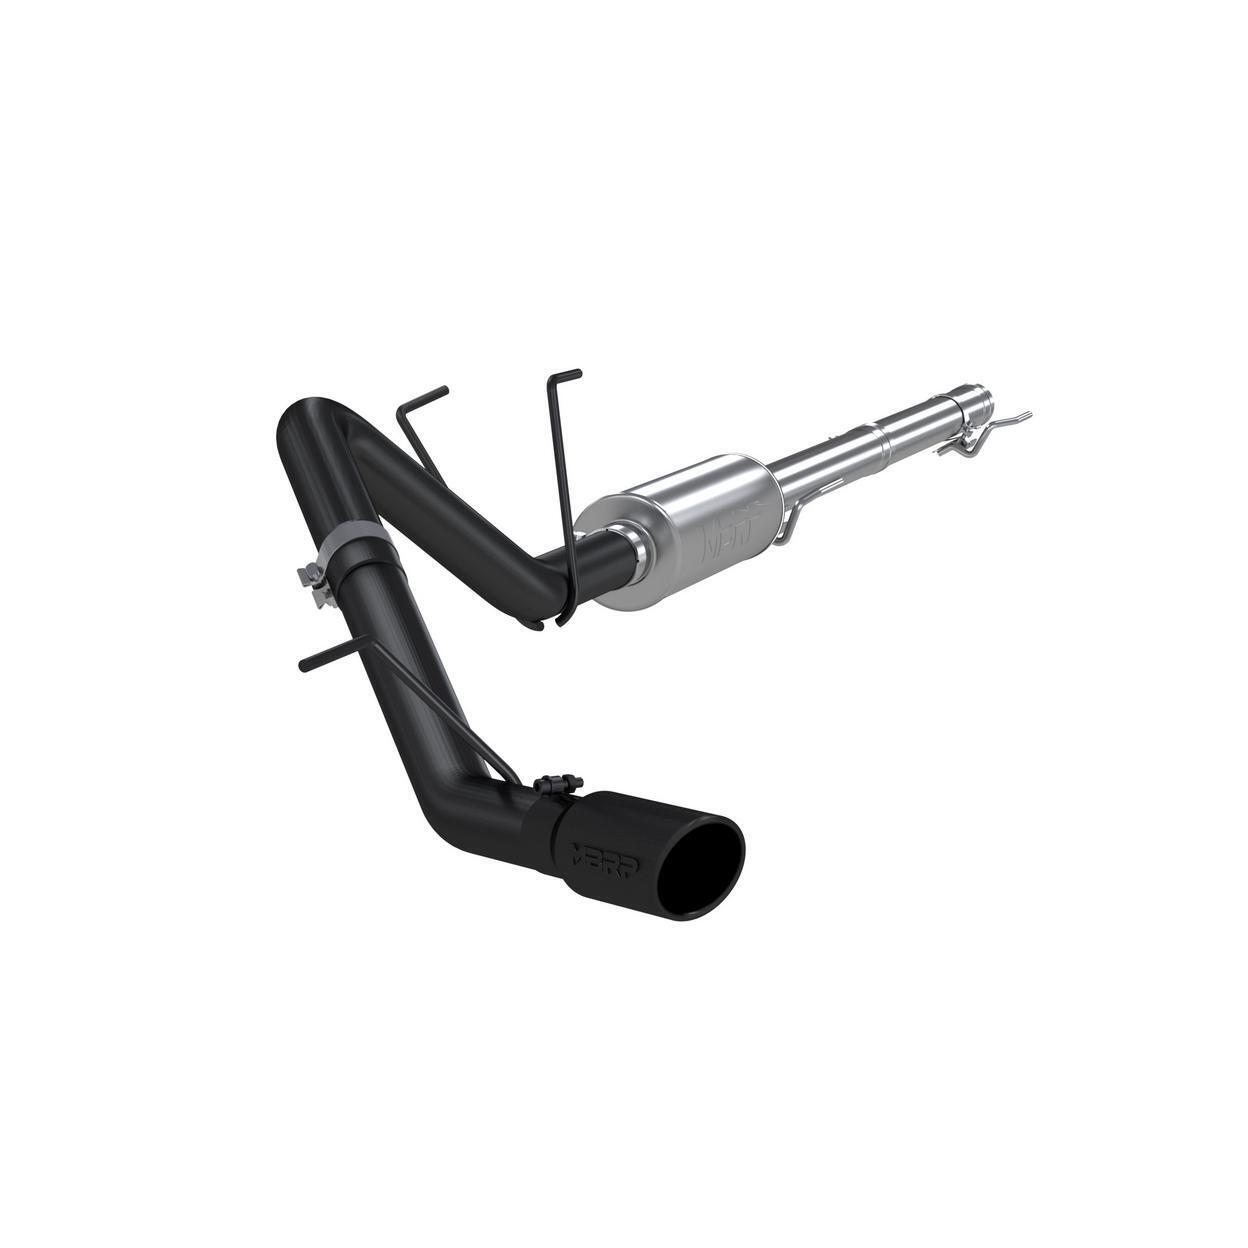 MBRP Exhaust S5142BLK-VY Exhaust System Kit for 2012-2013 Ram 1500